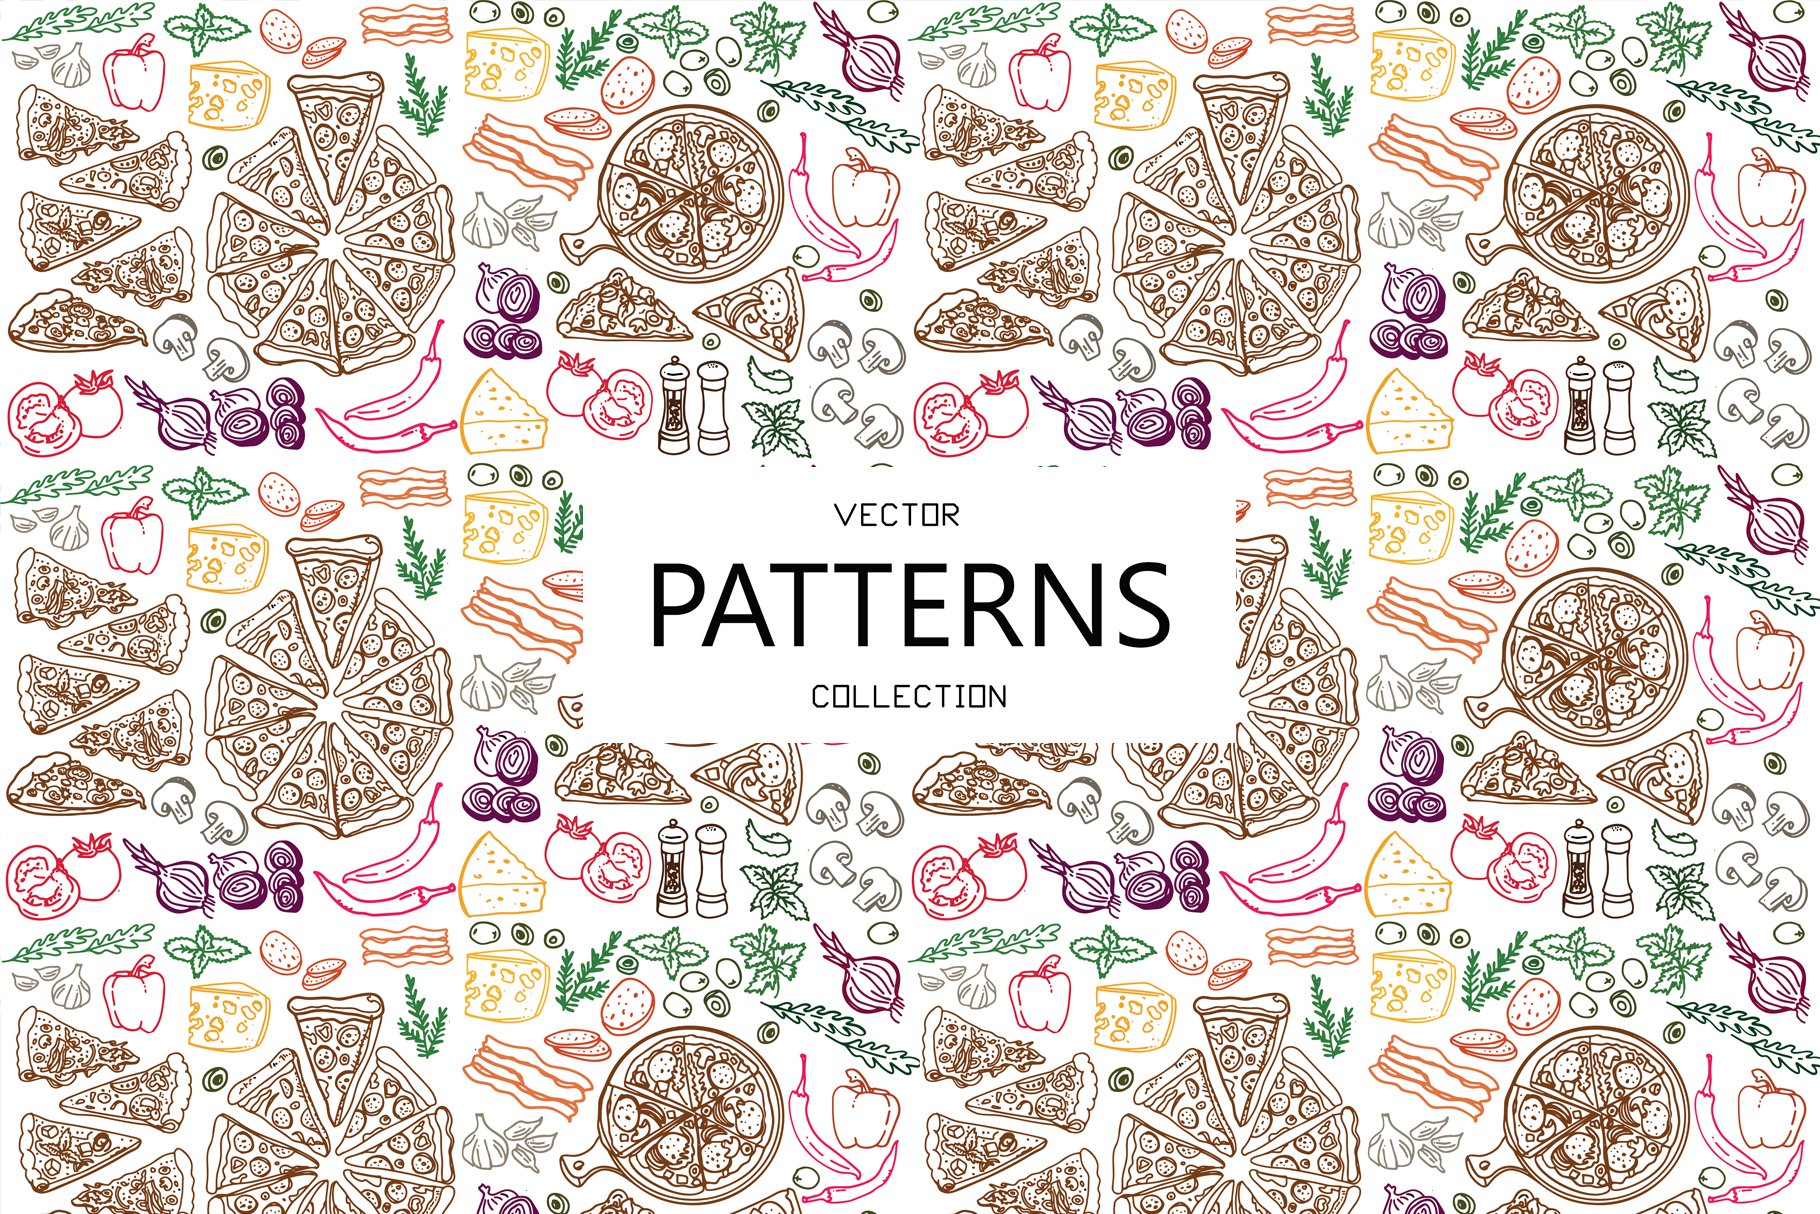 Pizza Set + Seamless Pattern cover image.